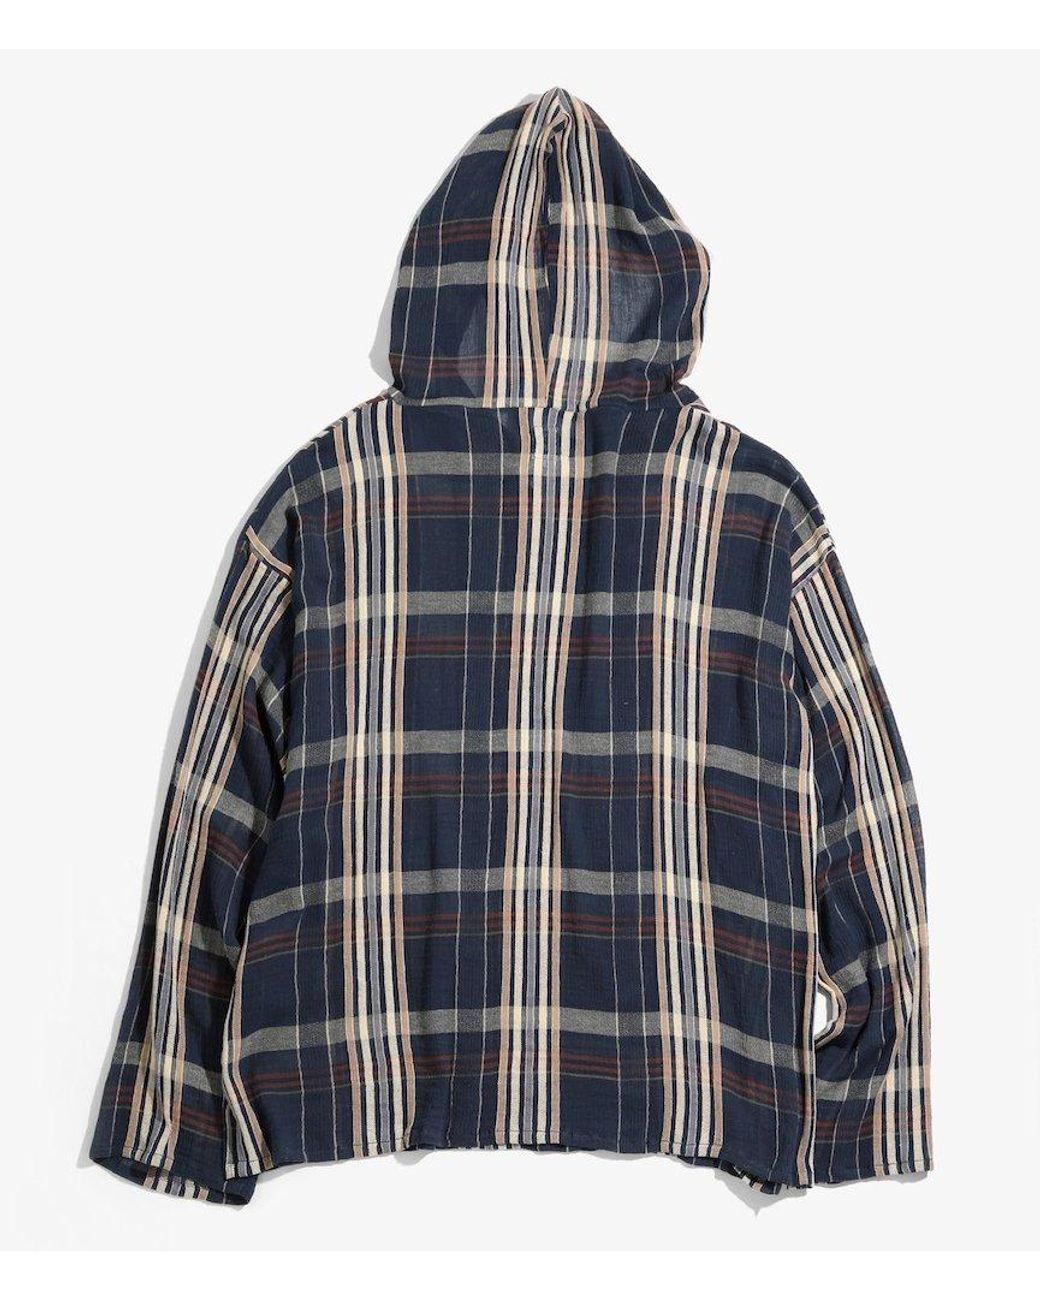 South2 West8 Cotton Mexican Parka Crepe Plaid Navy/orange/white in 